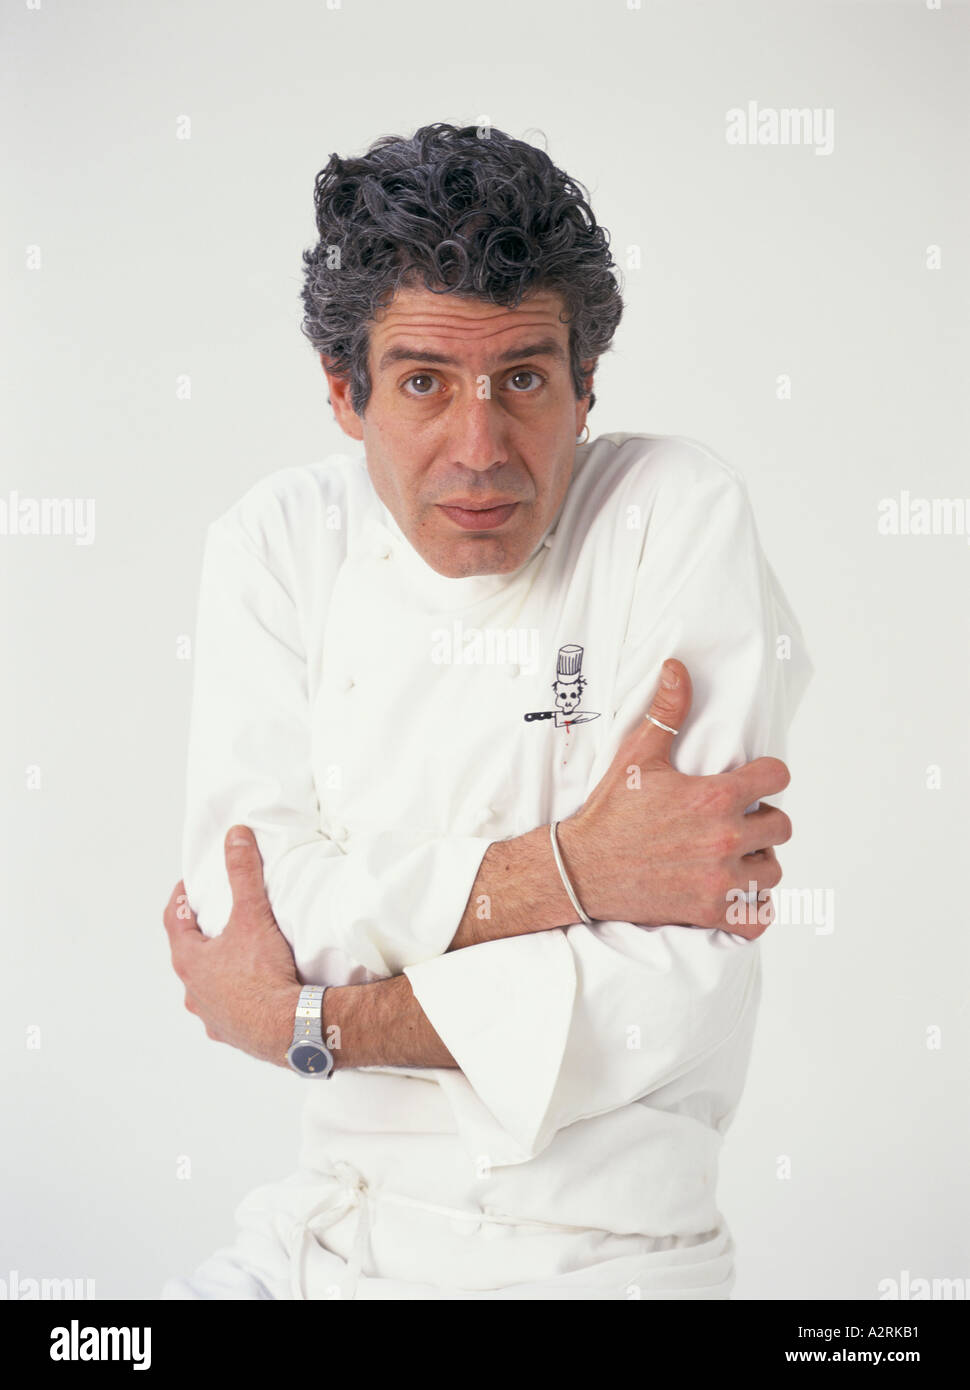 Anthony Bourdain Chef Writer Of Kitchen Confidential Adventures In A2RKB1 